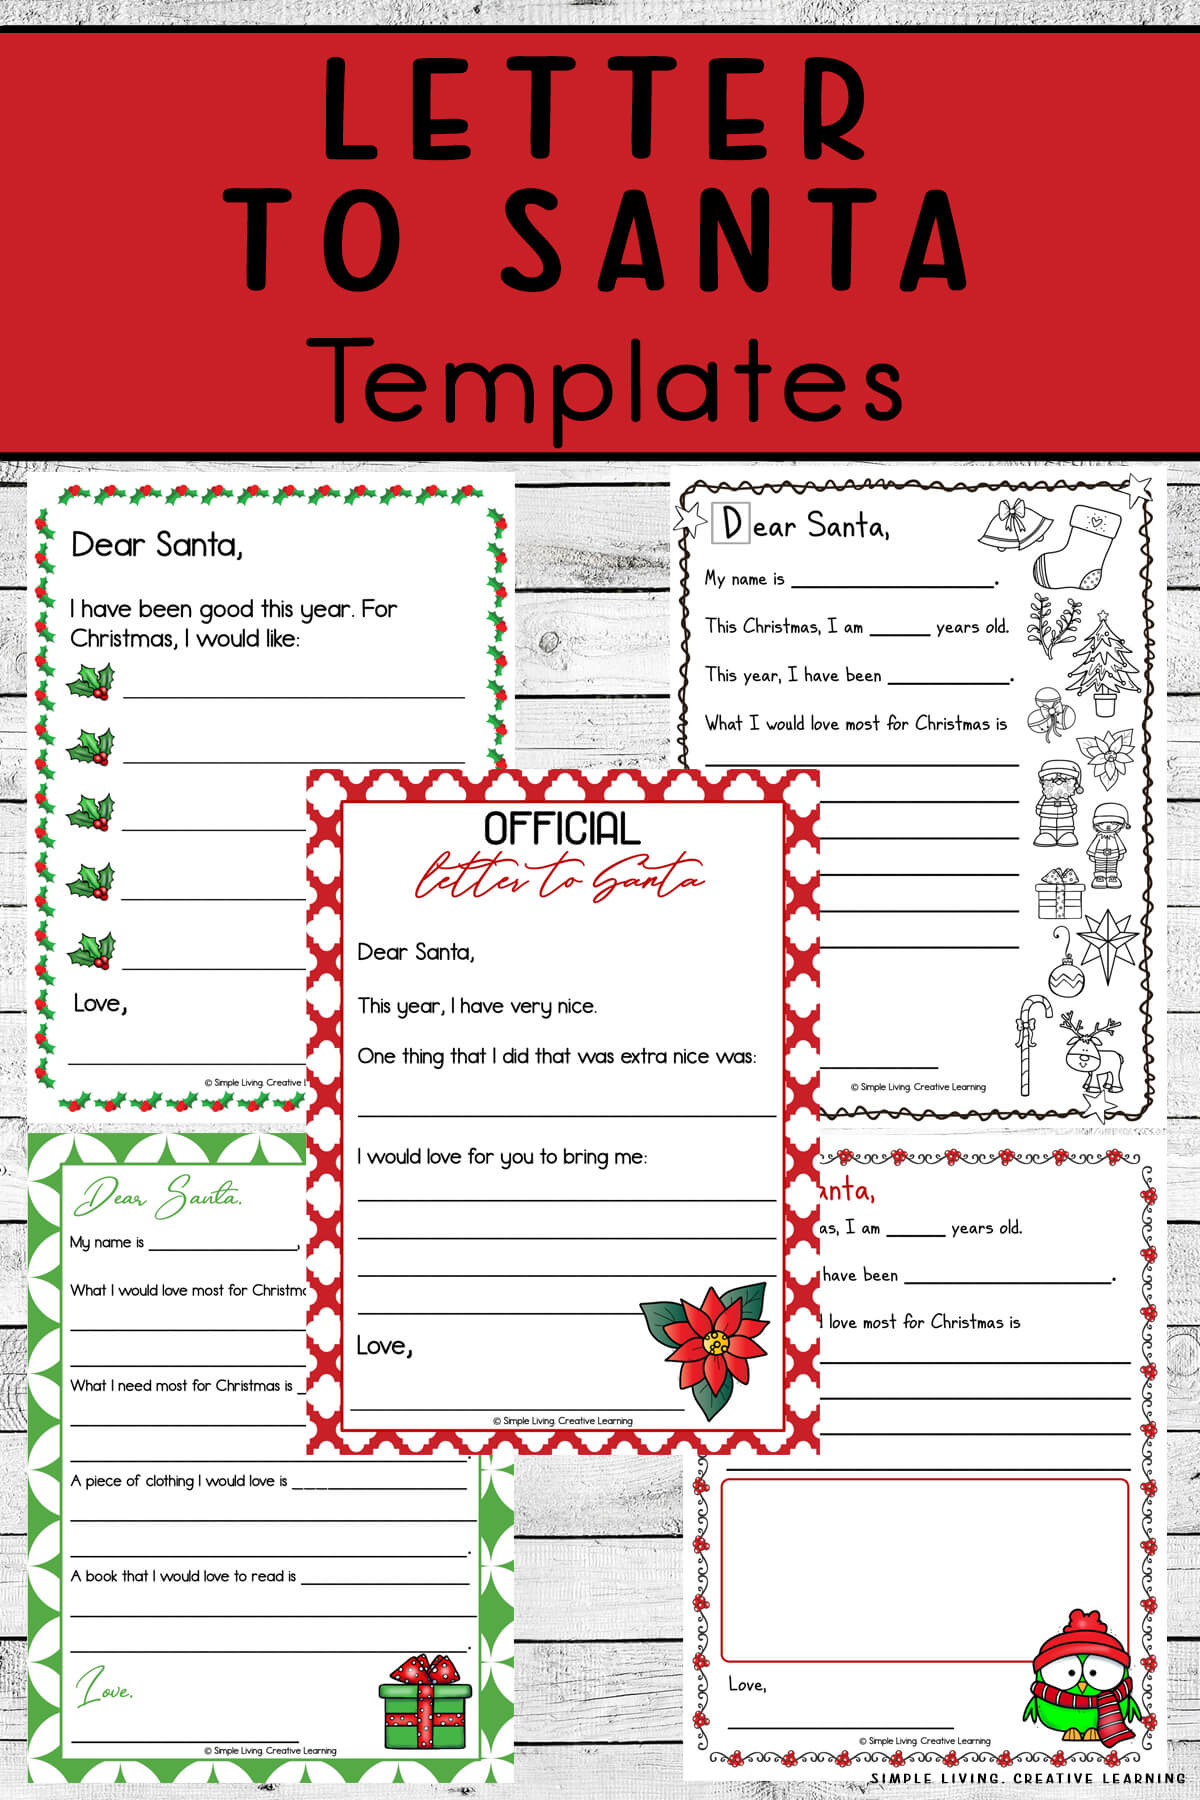 Letters to Santa Templates